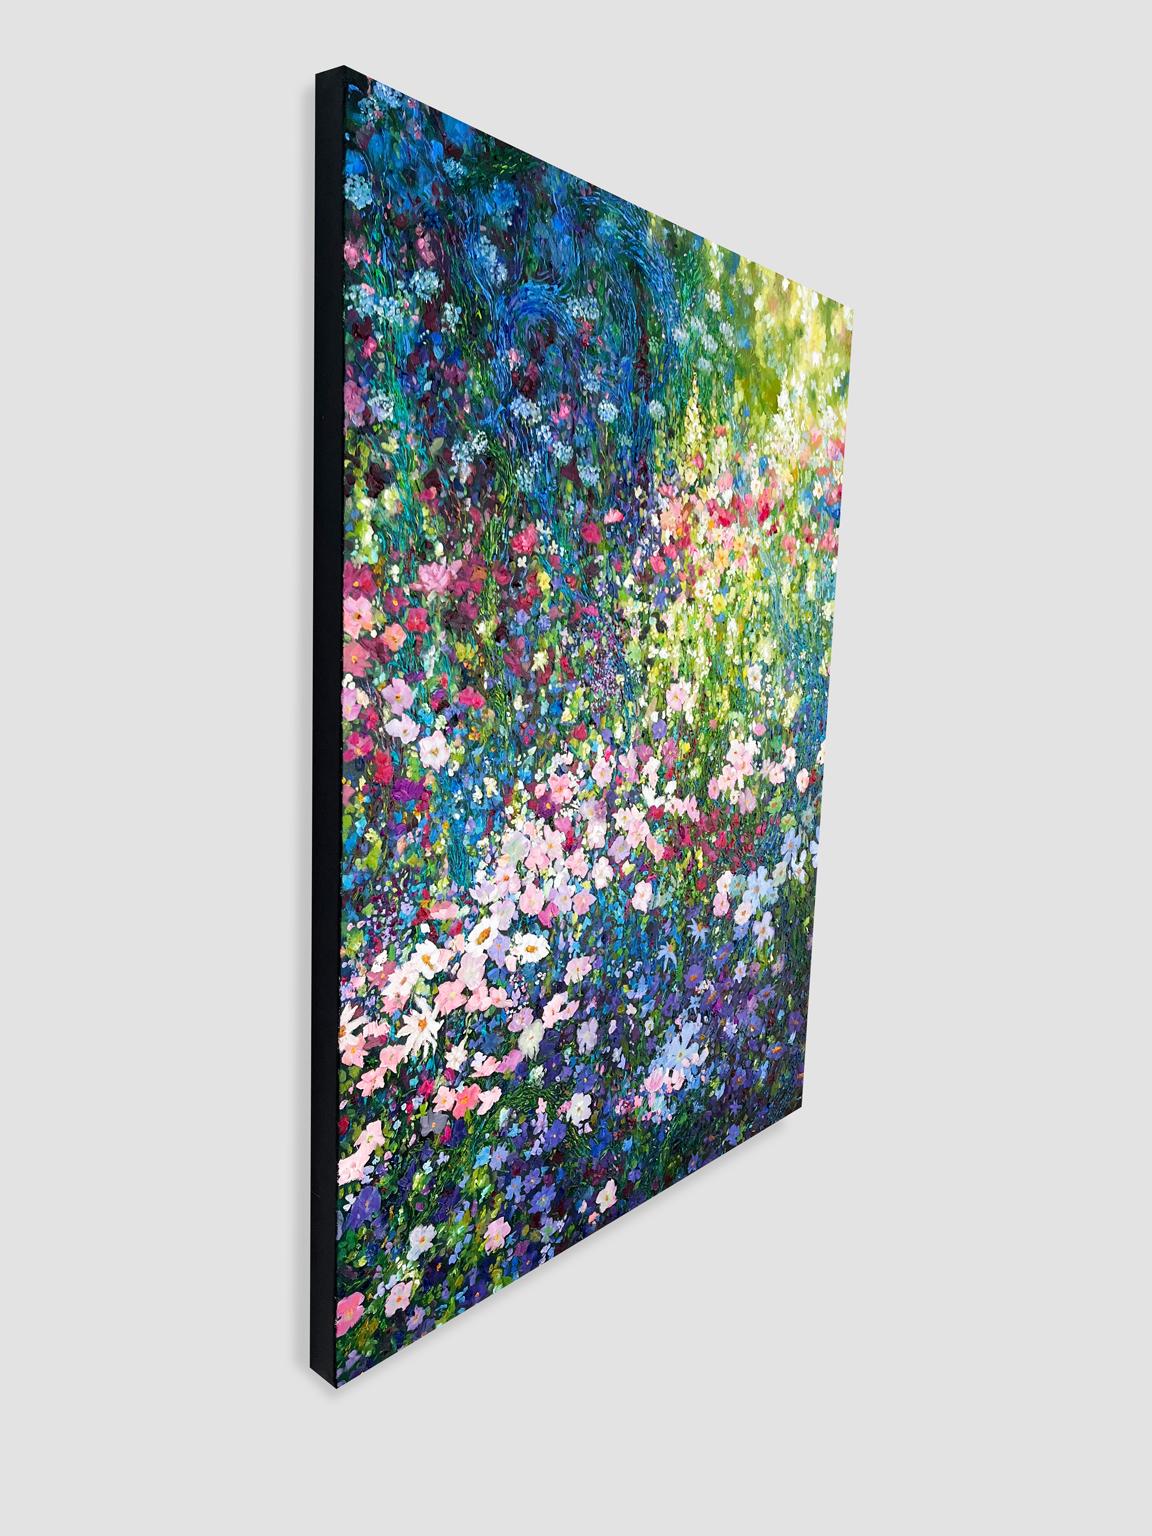 <p>Artist Comments<br>In the heart of Paris, a secluded garden stirs with the morning sun. Vibrant blue, green, and purple blend with a spontaneous burst of magenta and pink wildflowers. Thick, swirling stems weave among delicate blooms. The